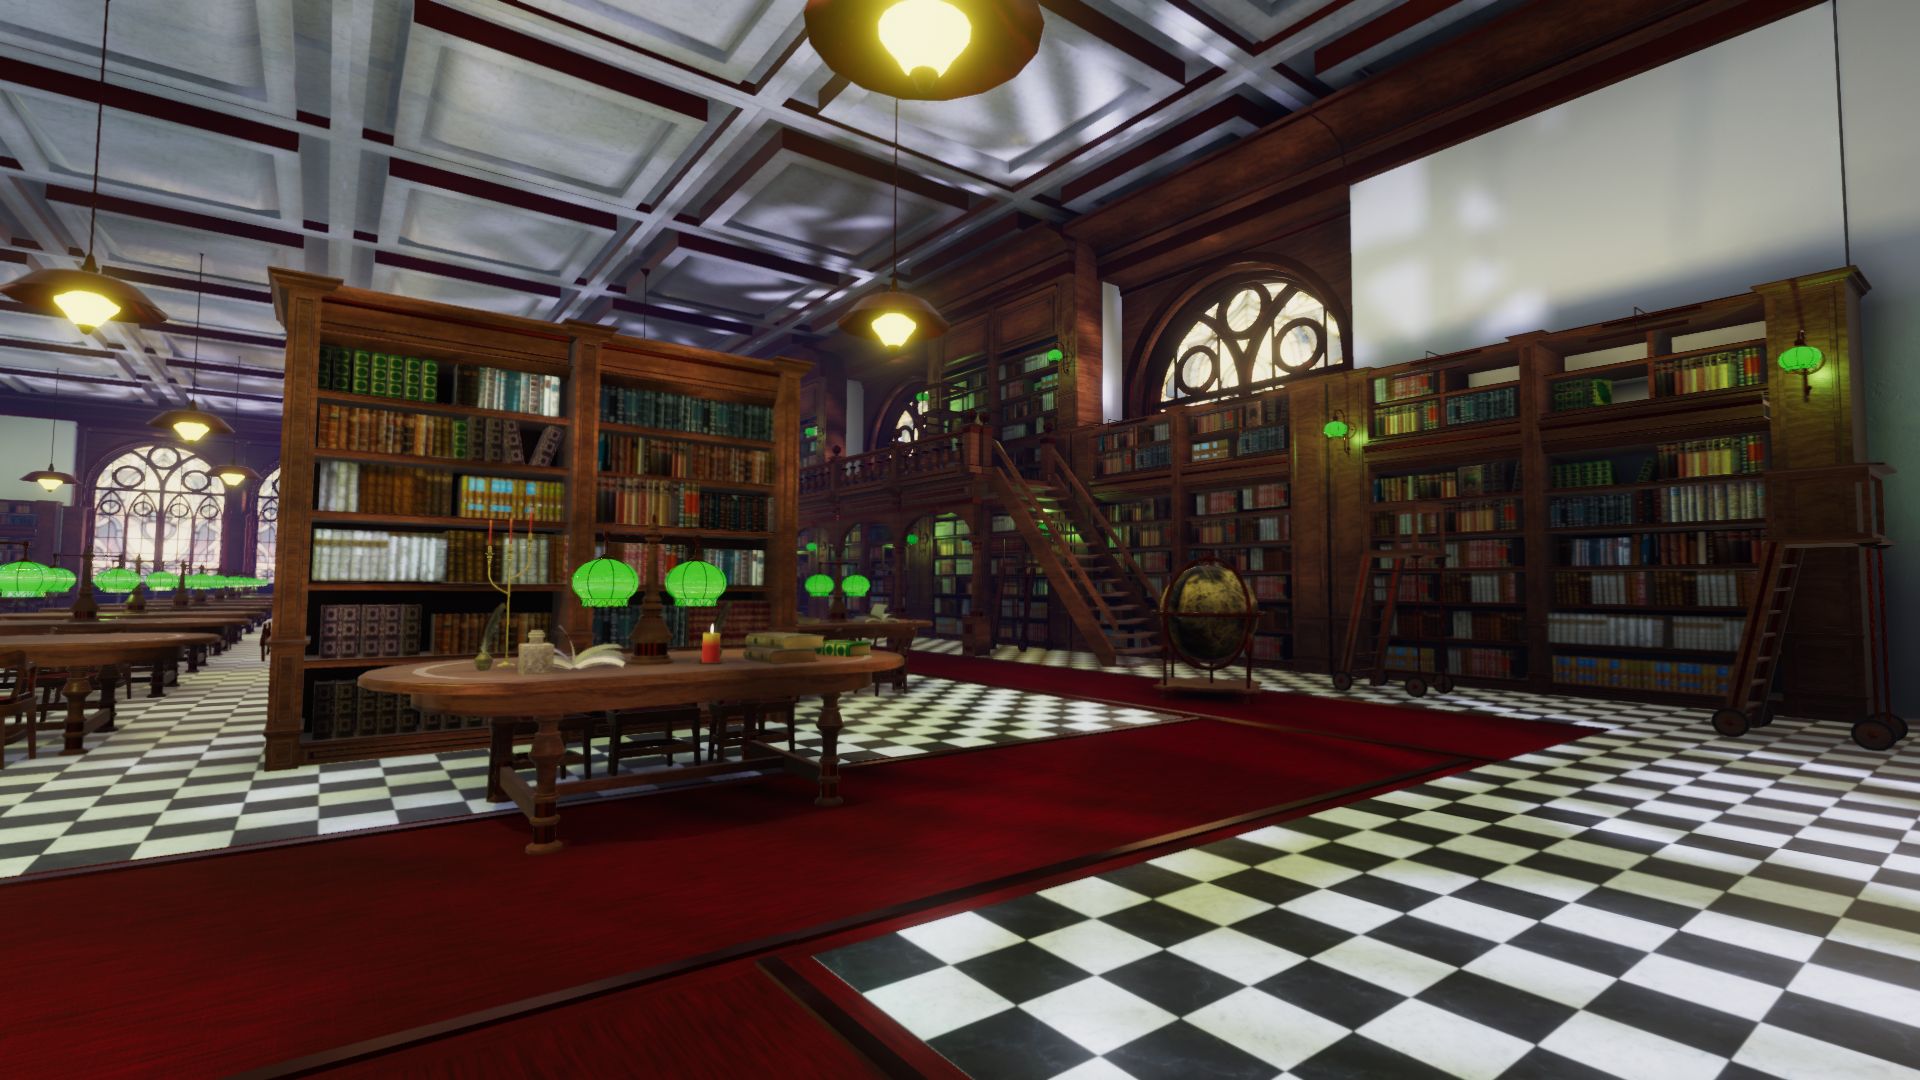 An image showing National Library asset pack, created with Unity Engine.